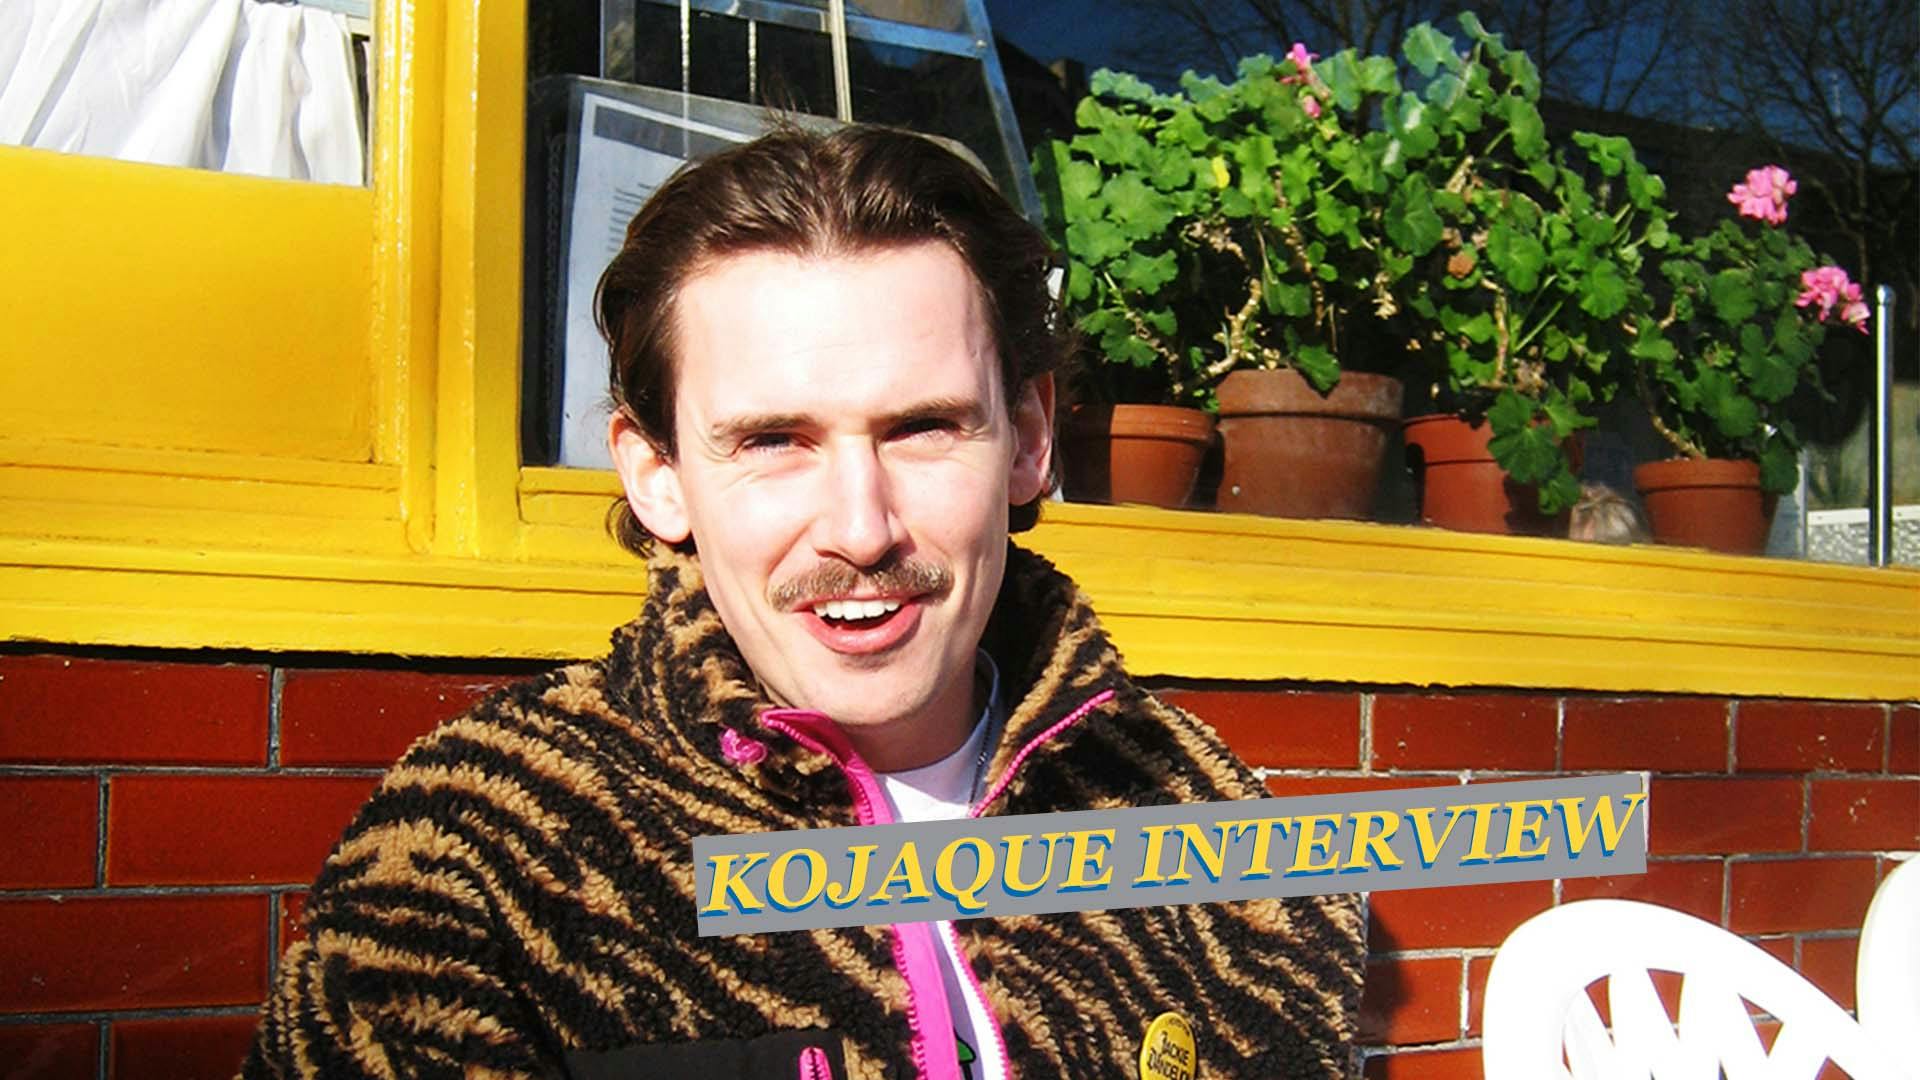 Interview: 5 minutes with Kojaque